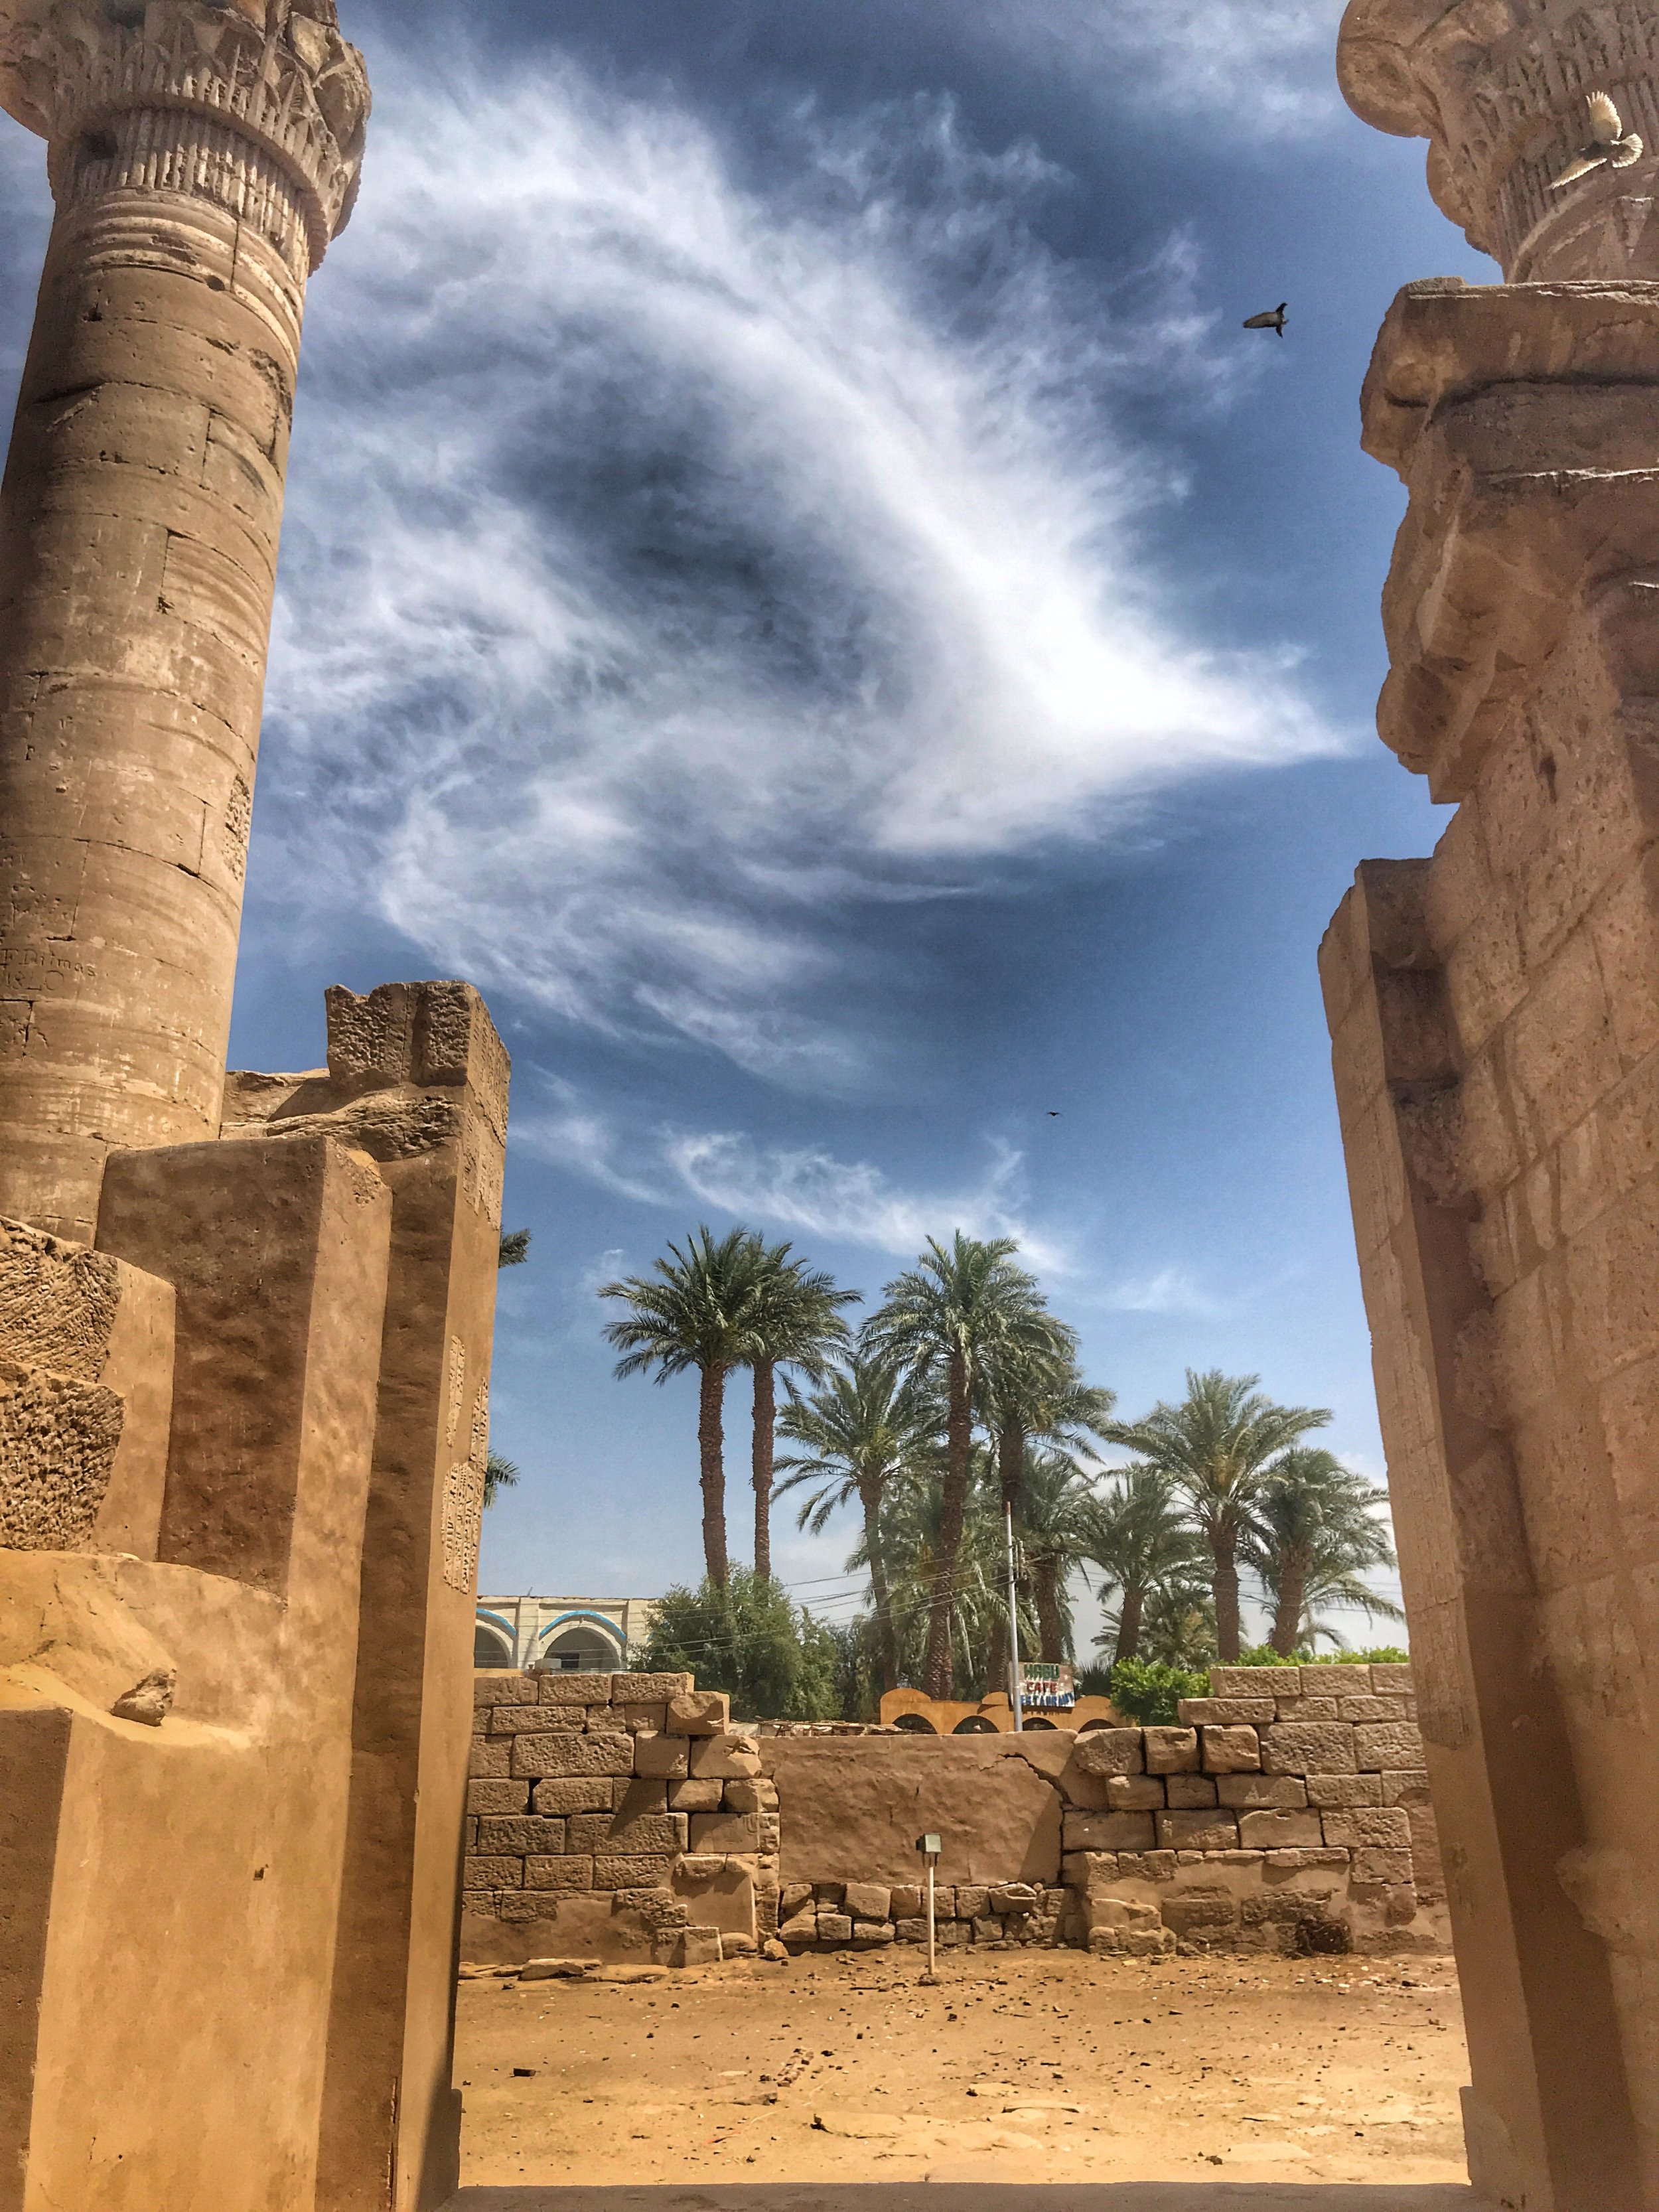 The exterior wall is yet another sign that Medinet Habu was built to resemble a fortress